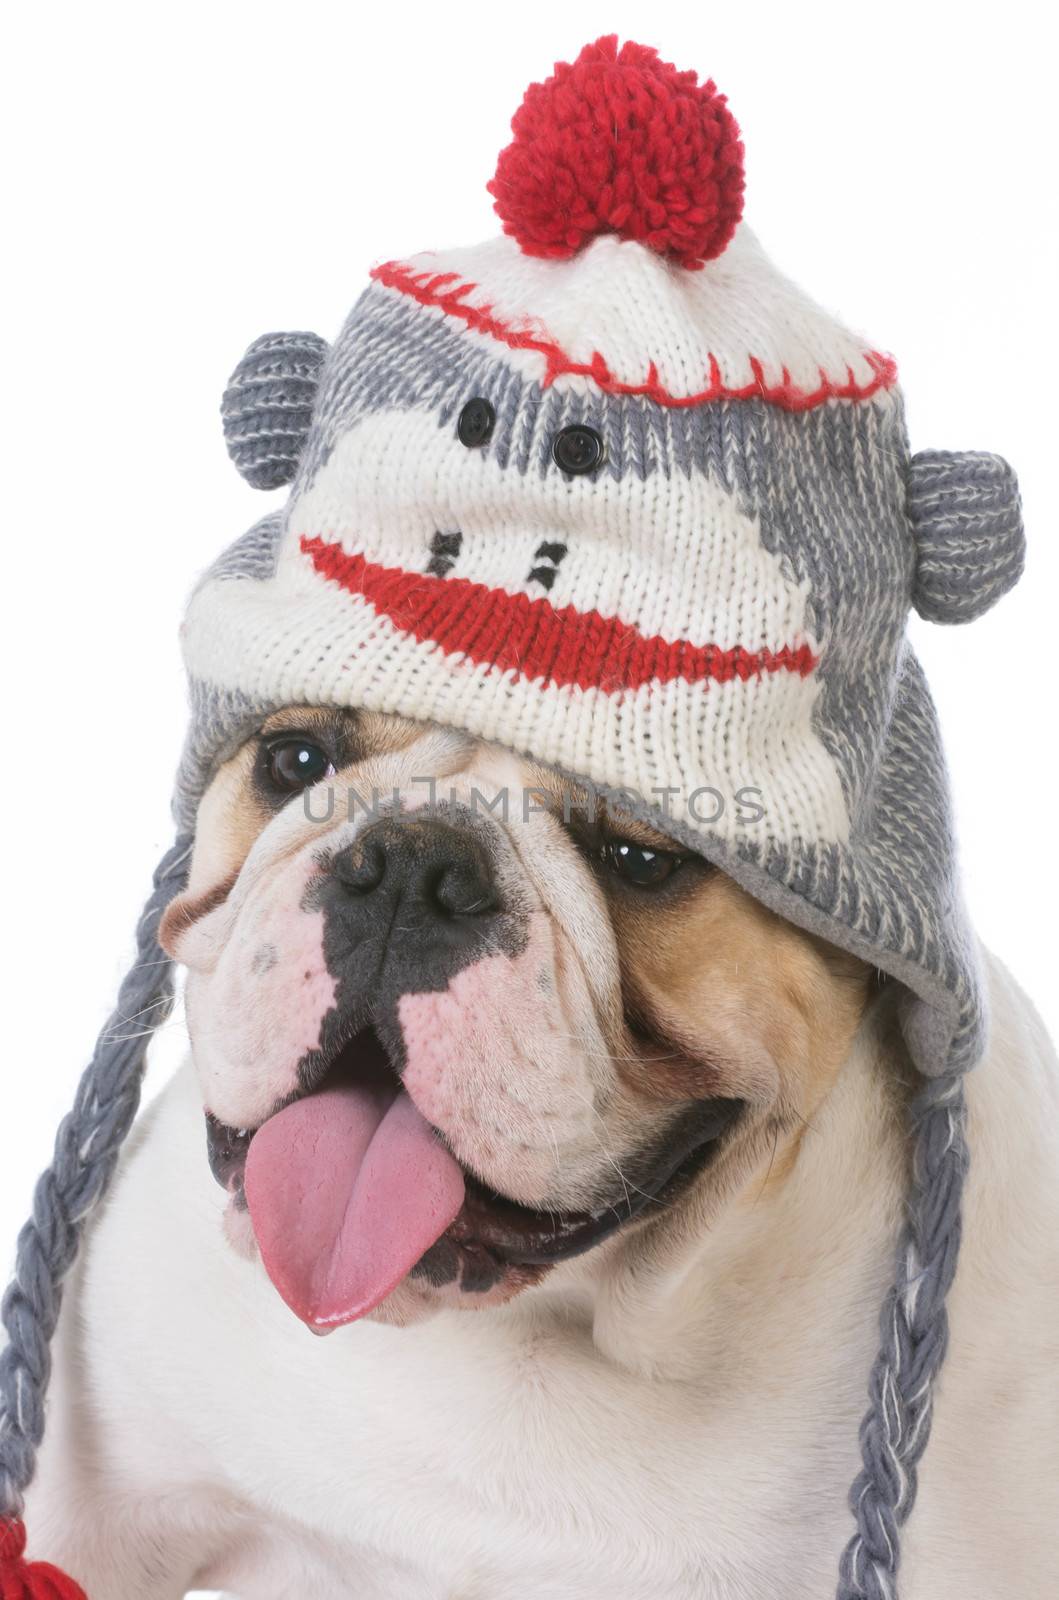 dog wearing hat by willeecole123